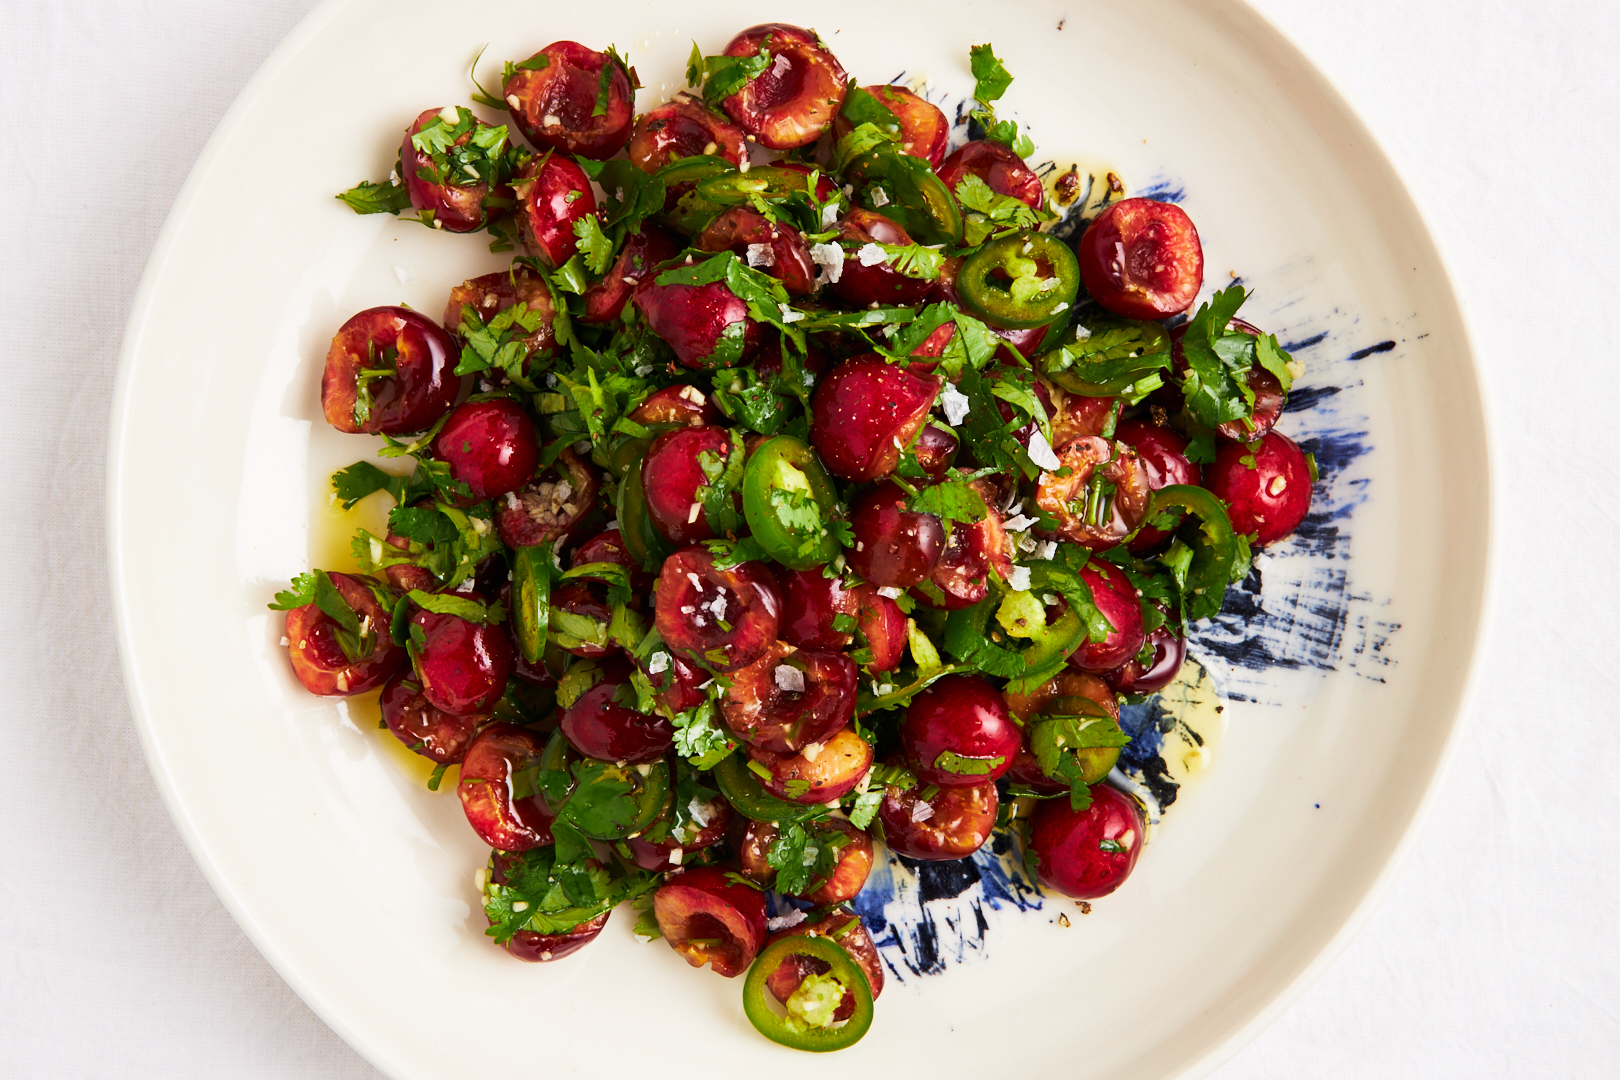 Cherry salad with chili and cilantro atop a white plate and white background